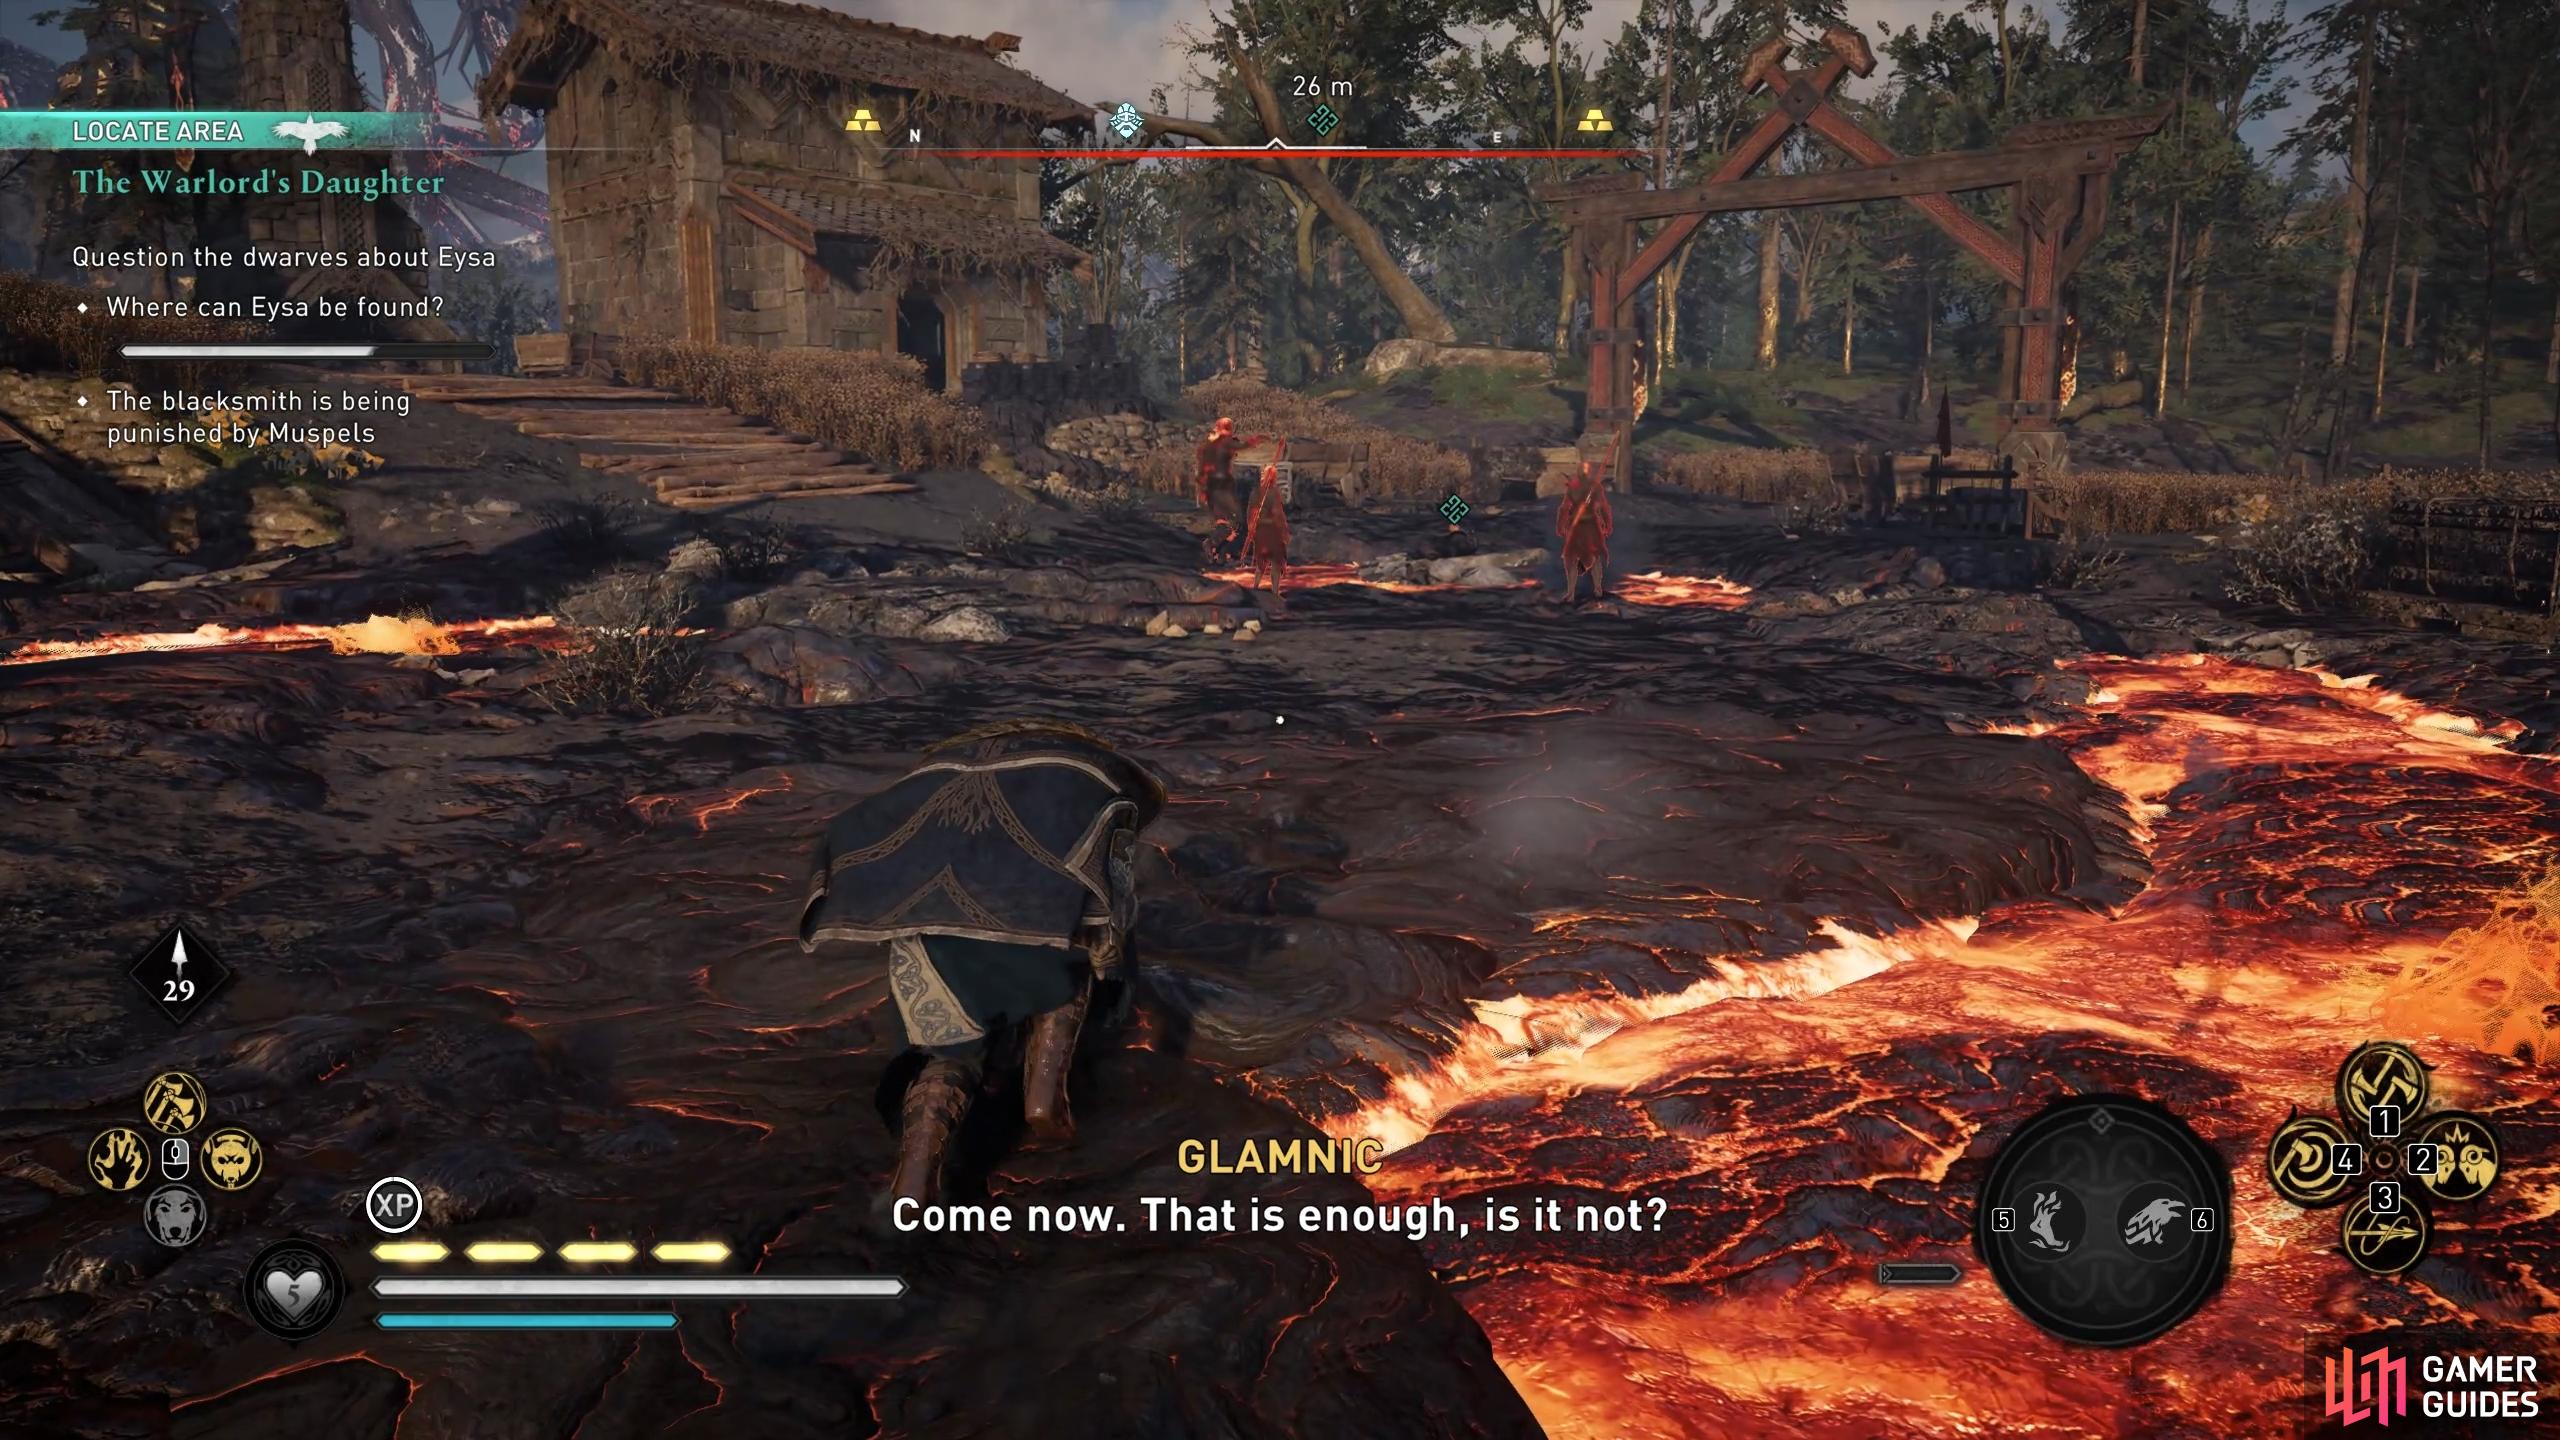 You can rescue the blacksmith using the Power of Muspelheim, then speak with him for key information.